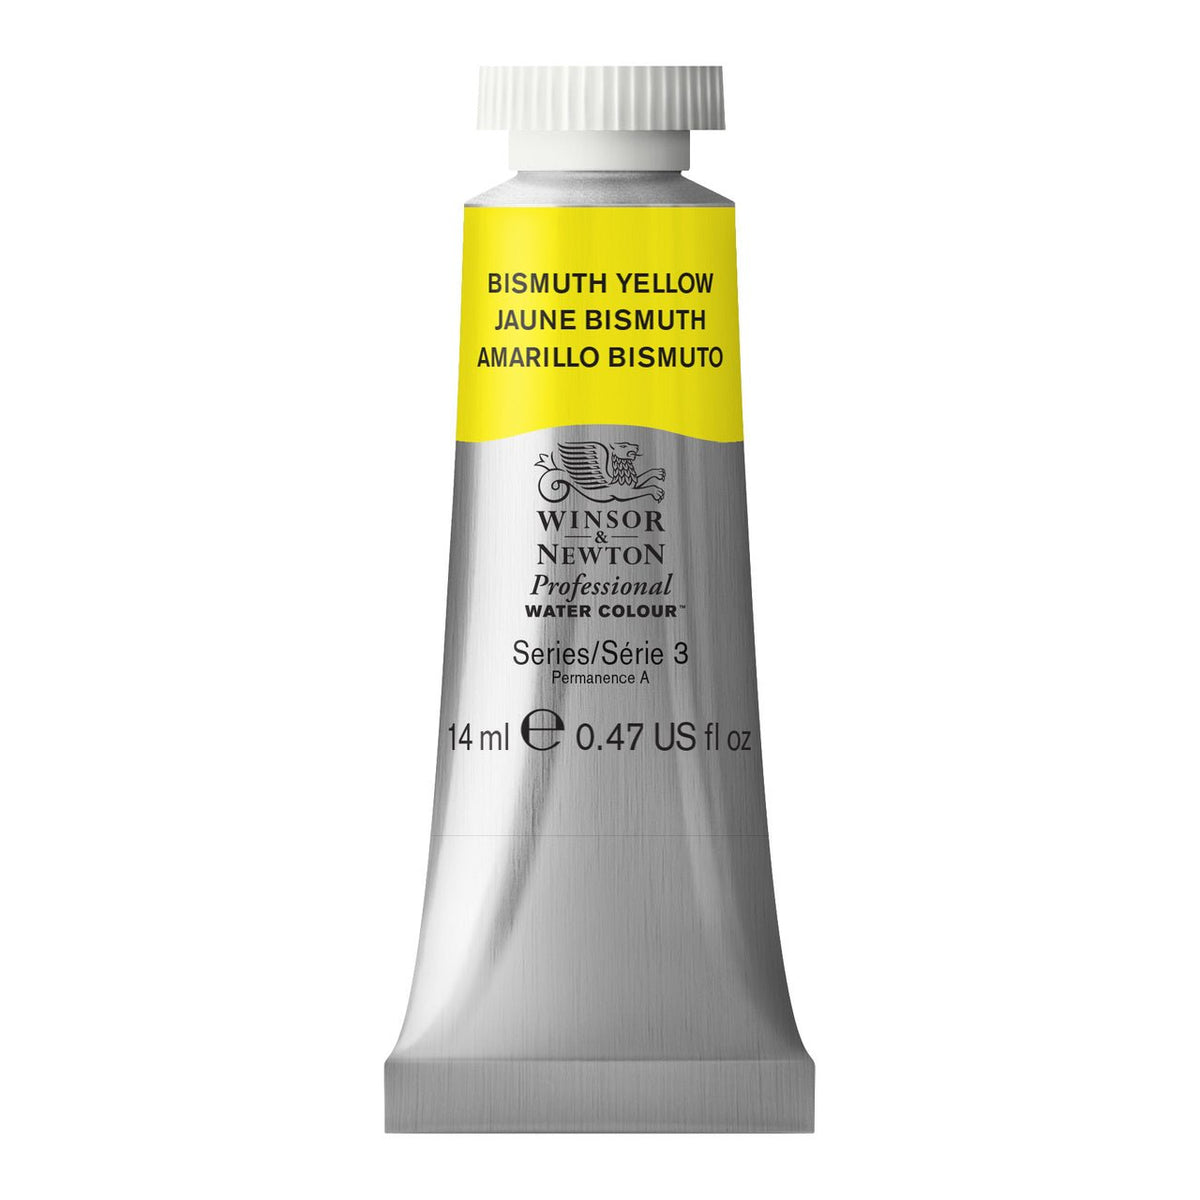 Winsor & Newton Professional Watercolor Bismuth Yellow 14ml - merriartist.com